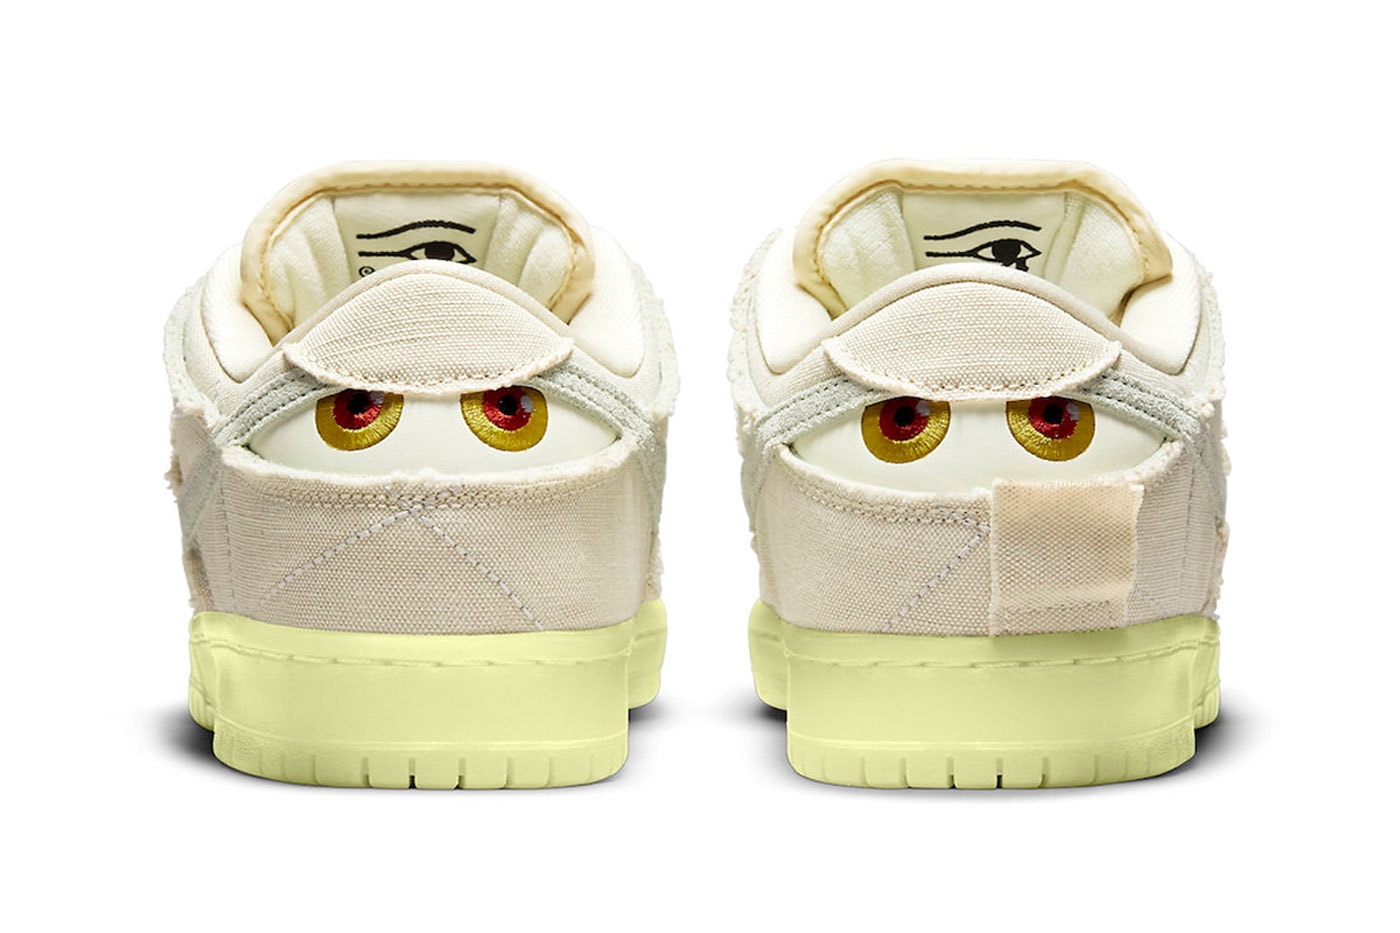 Nike SB Dunk Low "Mummy" Official Images DM0774-111 Release 2021 Halloween October